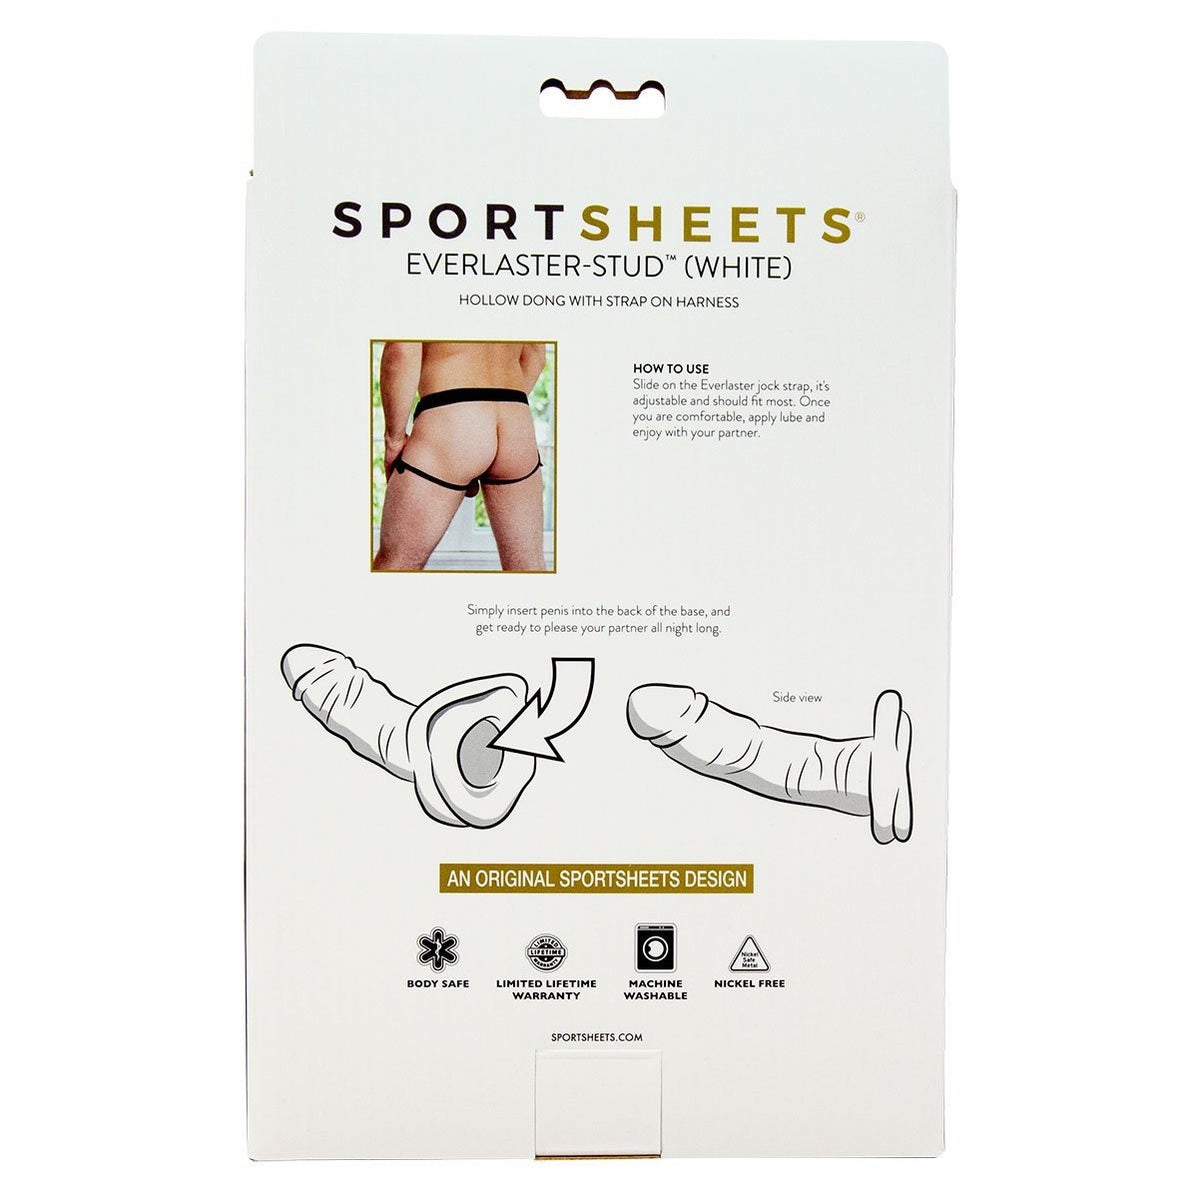 Sportsheets - Hollow Dong with Strap-On Harness